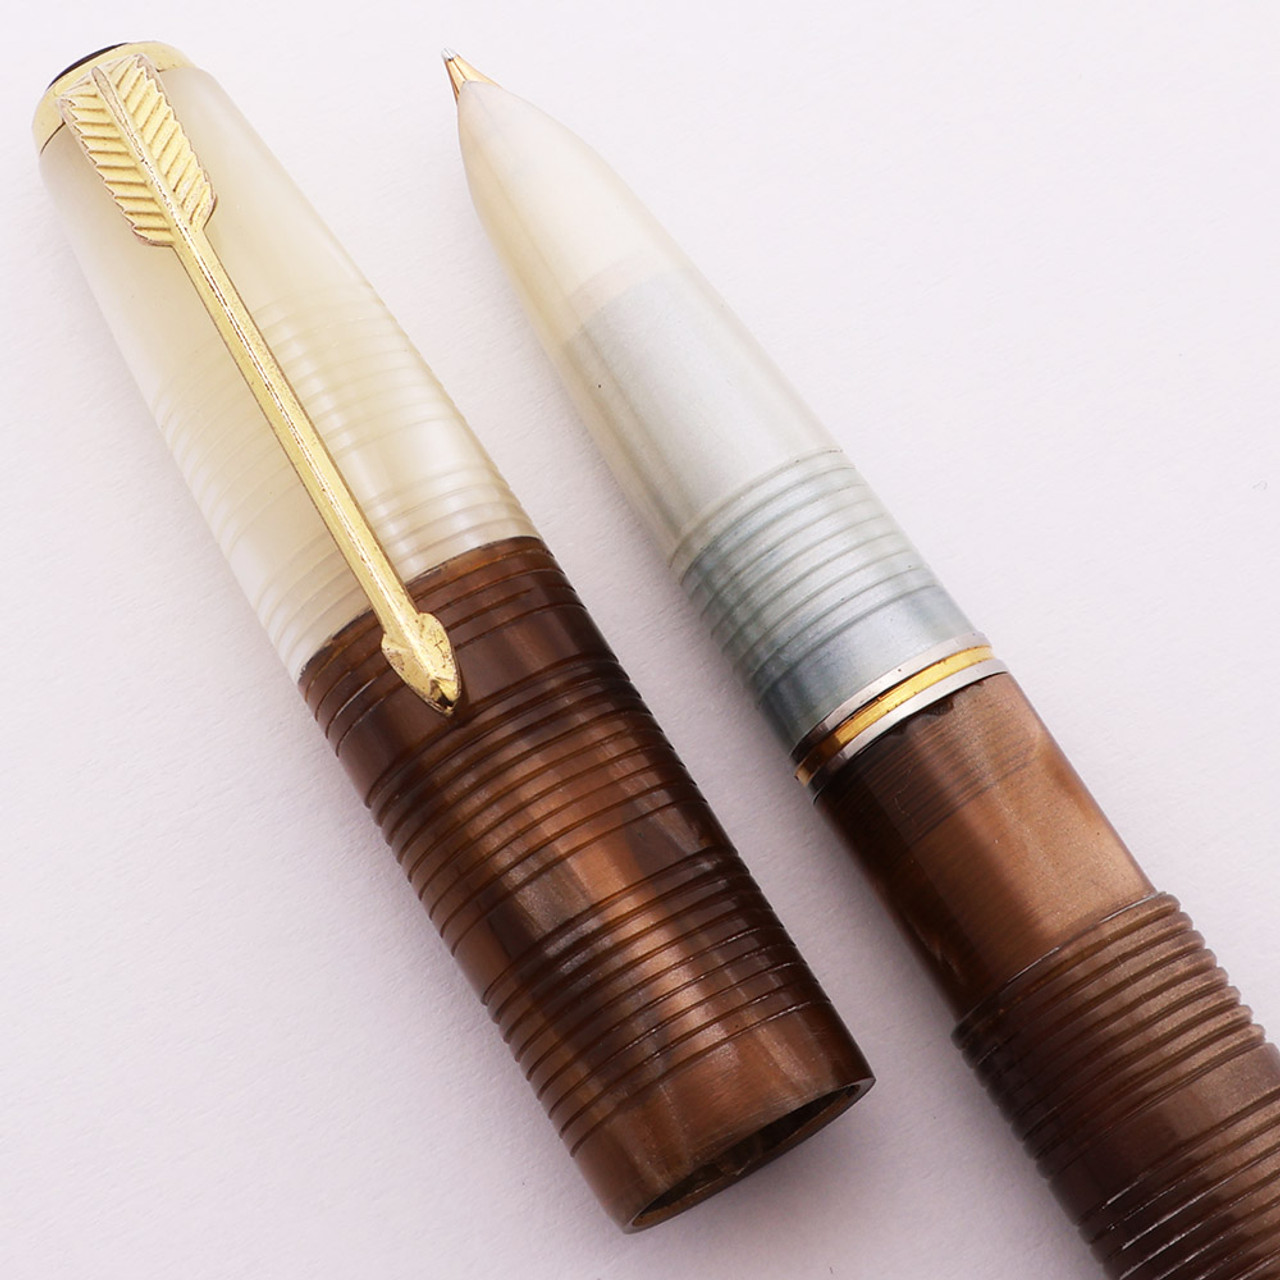 Parker 51 Ariel Kullock "Fantasy" Aerometric - Lined Two Colors, White/Brown, Fine Gold Nib (Excellent, Works Well)